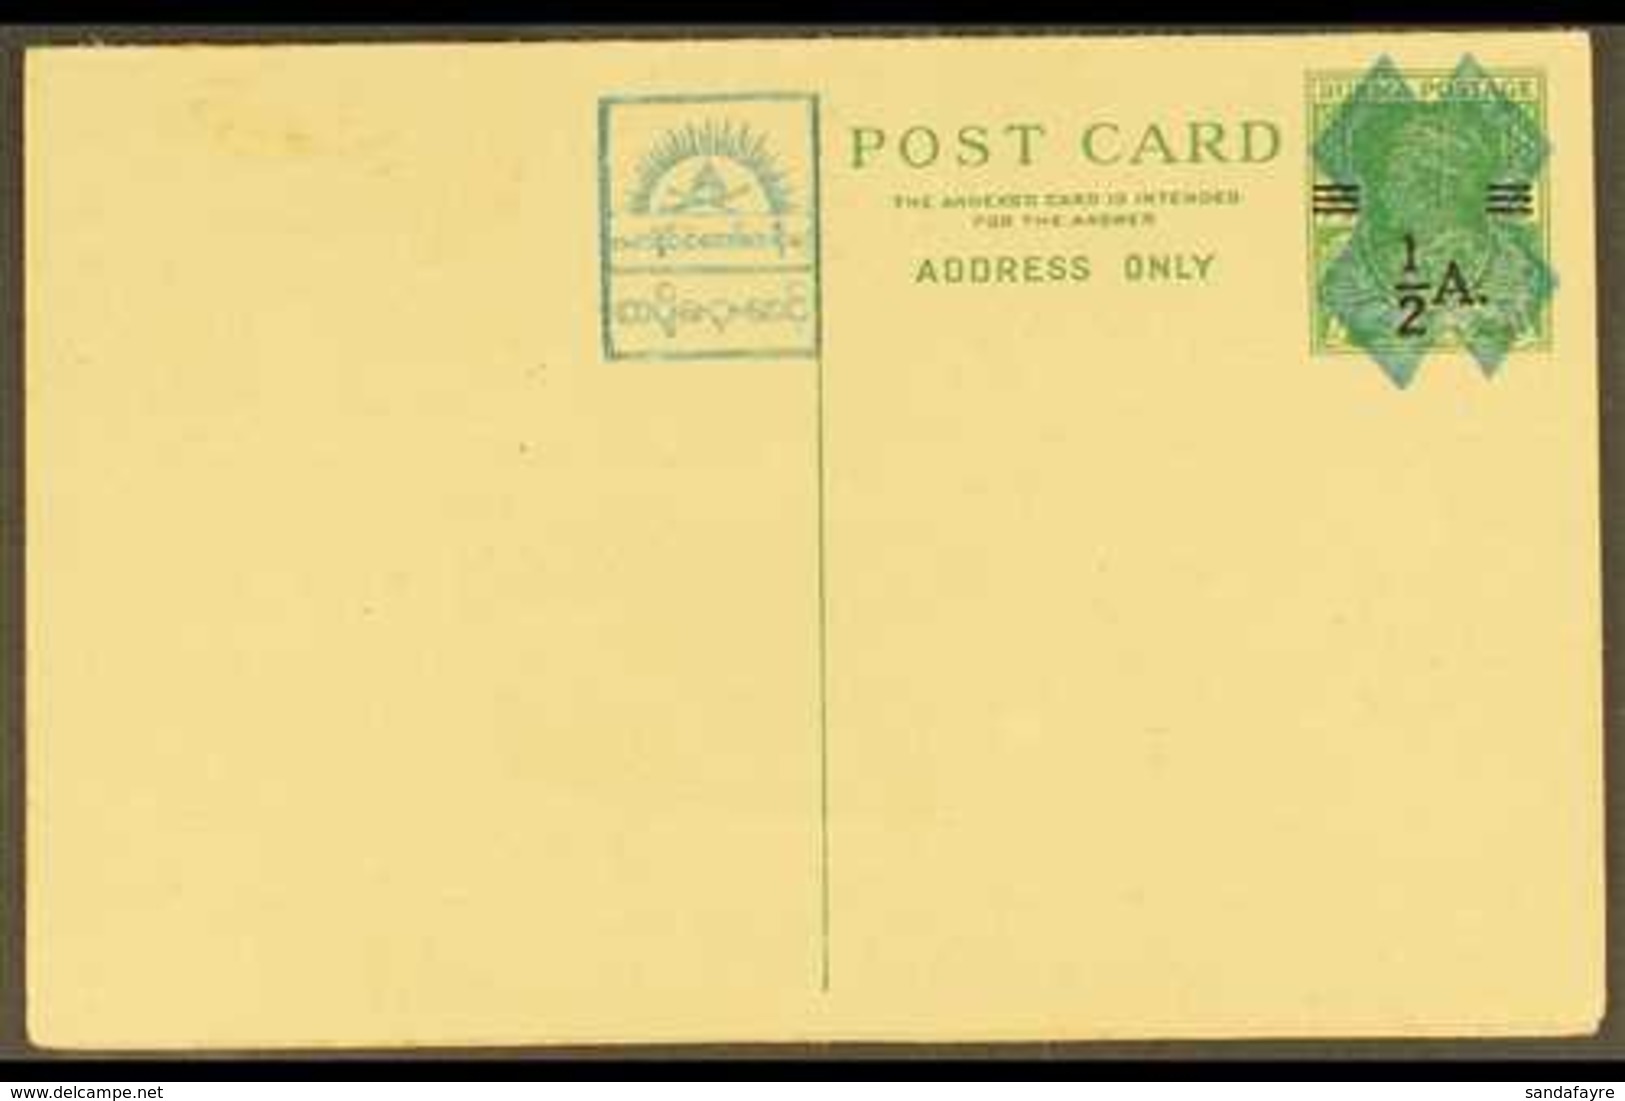 JAPANESE OCCUPATION  JAPANESE POSTAL ADMINISTRATION 1943 ½a On 9p + ½a On 9p Green Surcharge Postal Stationery Postcard  - Burma (...-1947)